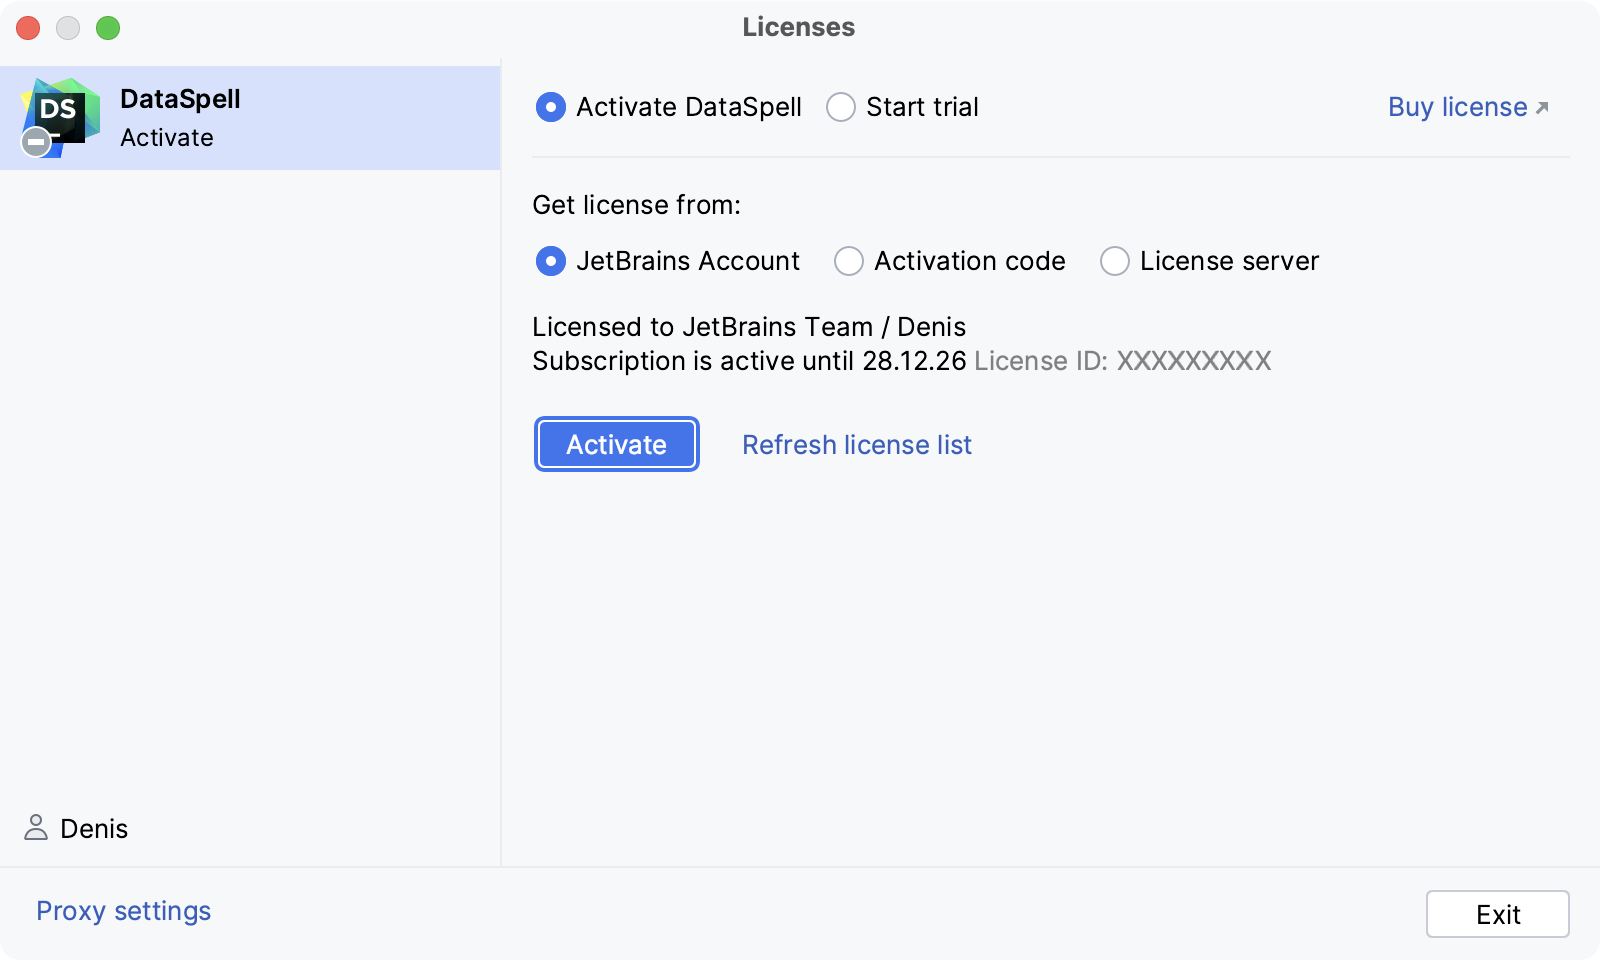 Activate DataSpell license with a JetBrains Account